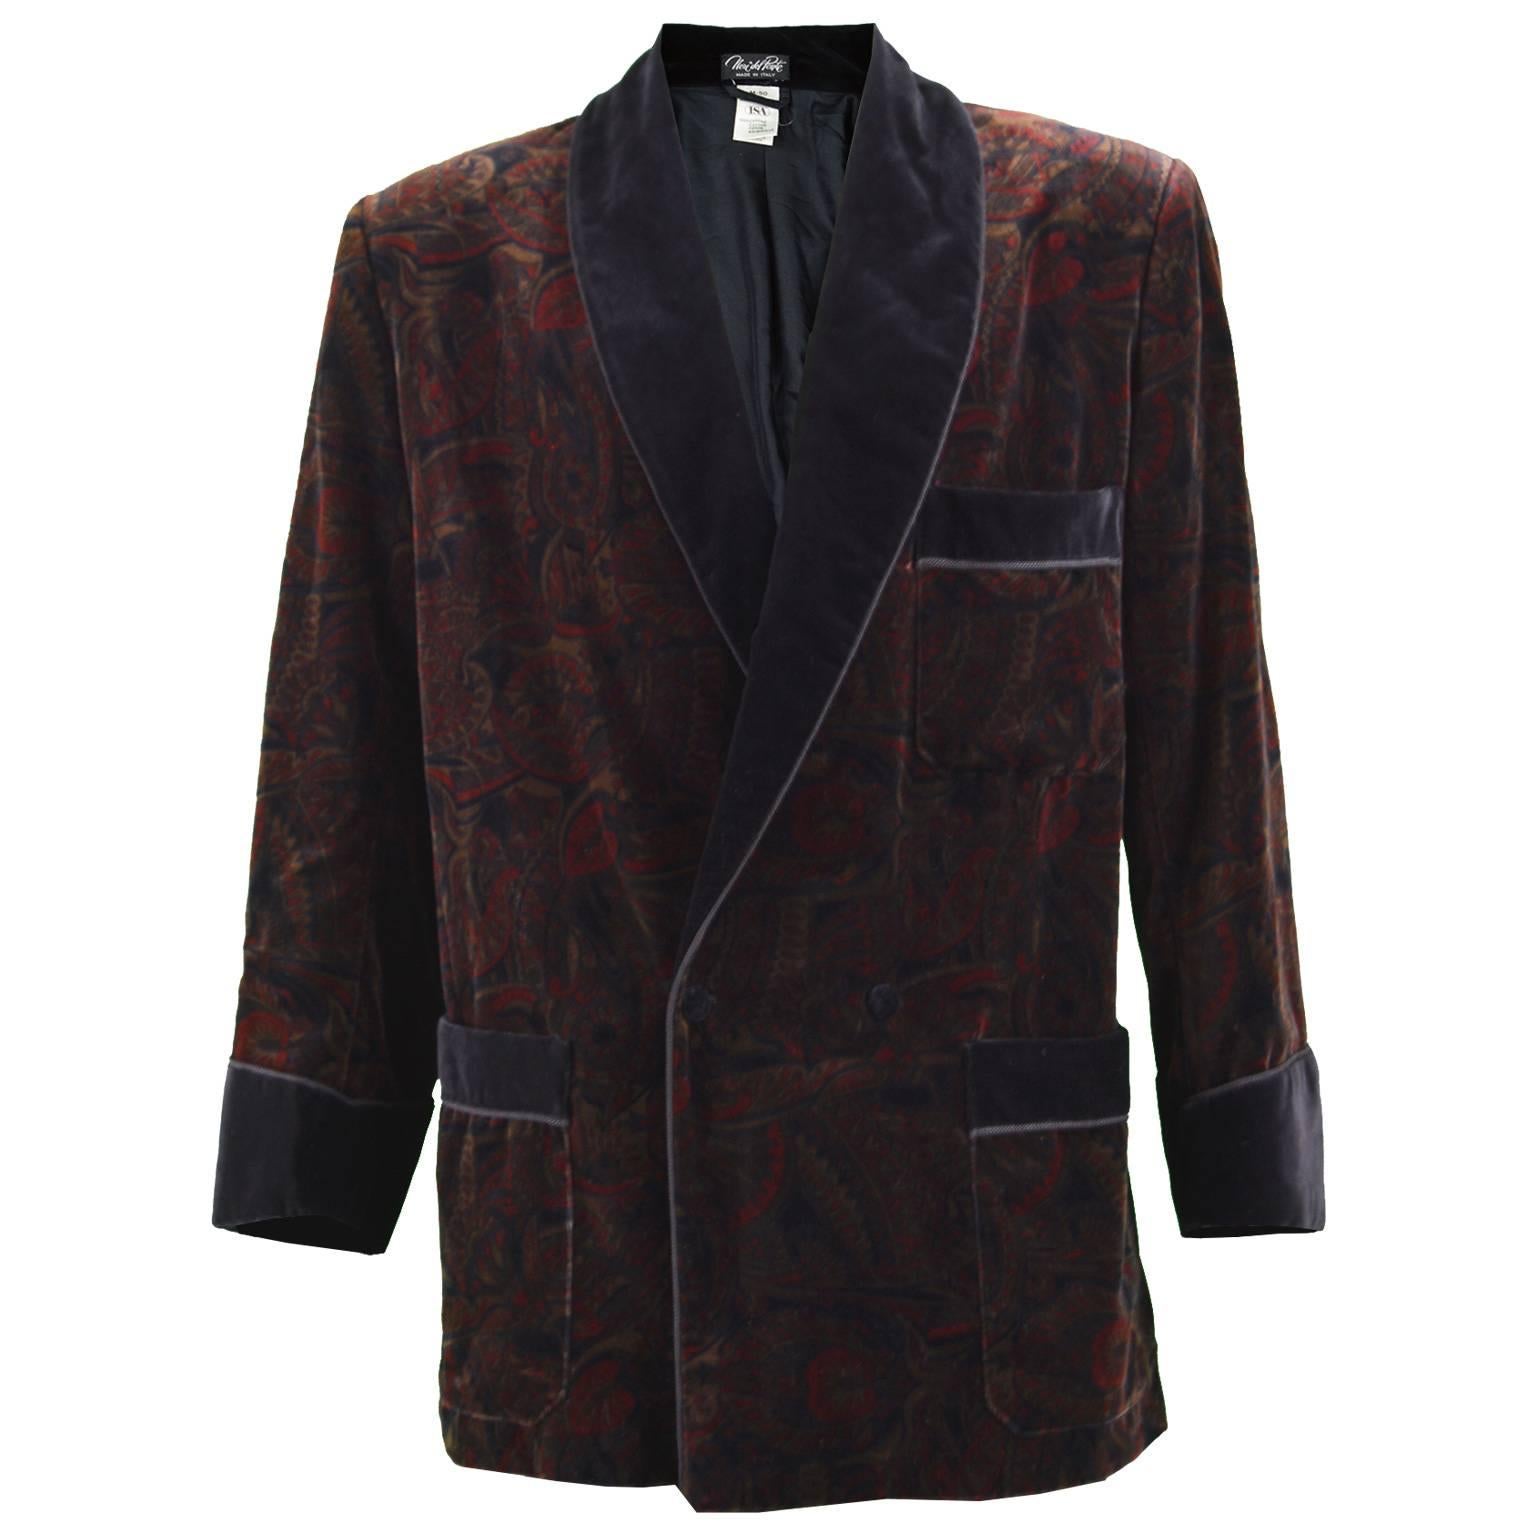 Men's Vintage Paisley Print Velvet Smoking Jacket with Braided Lapels, 1980s For Sale